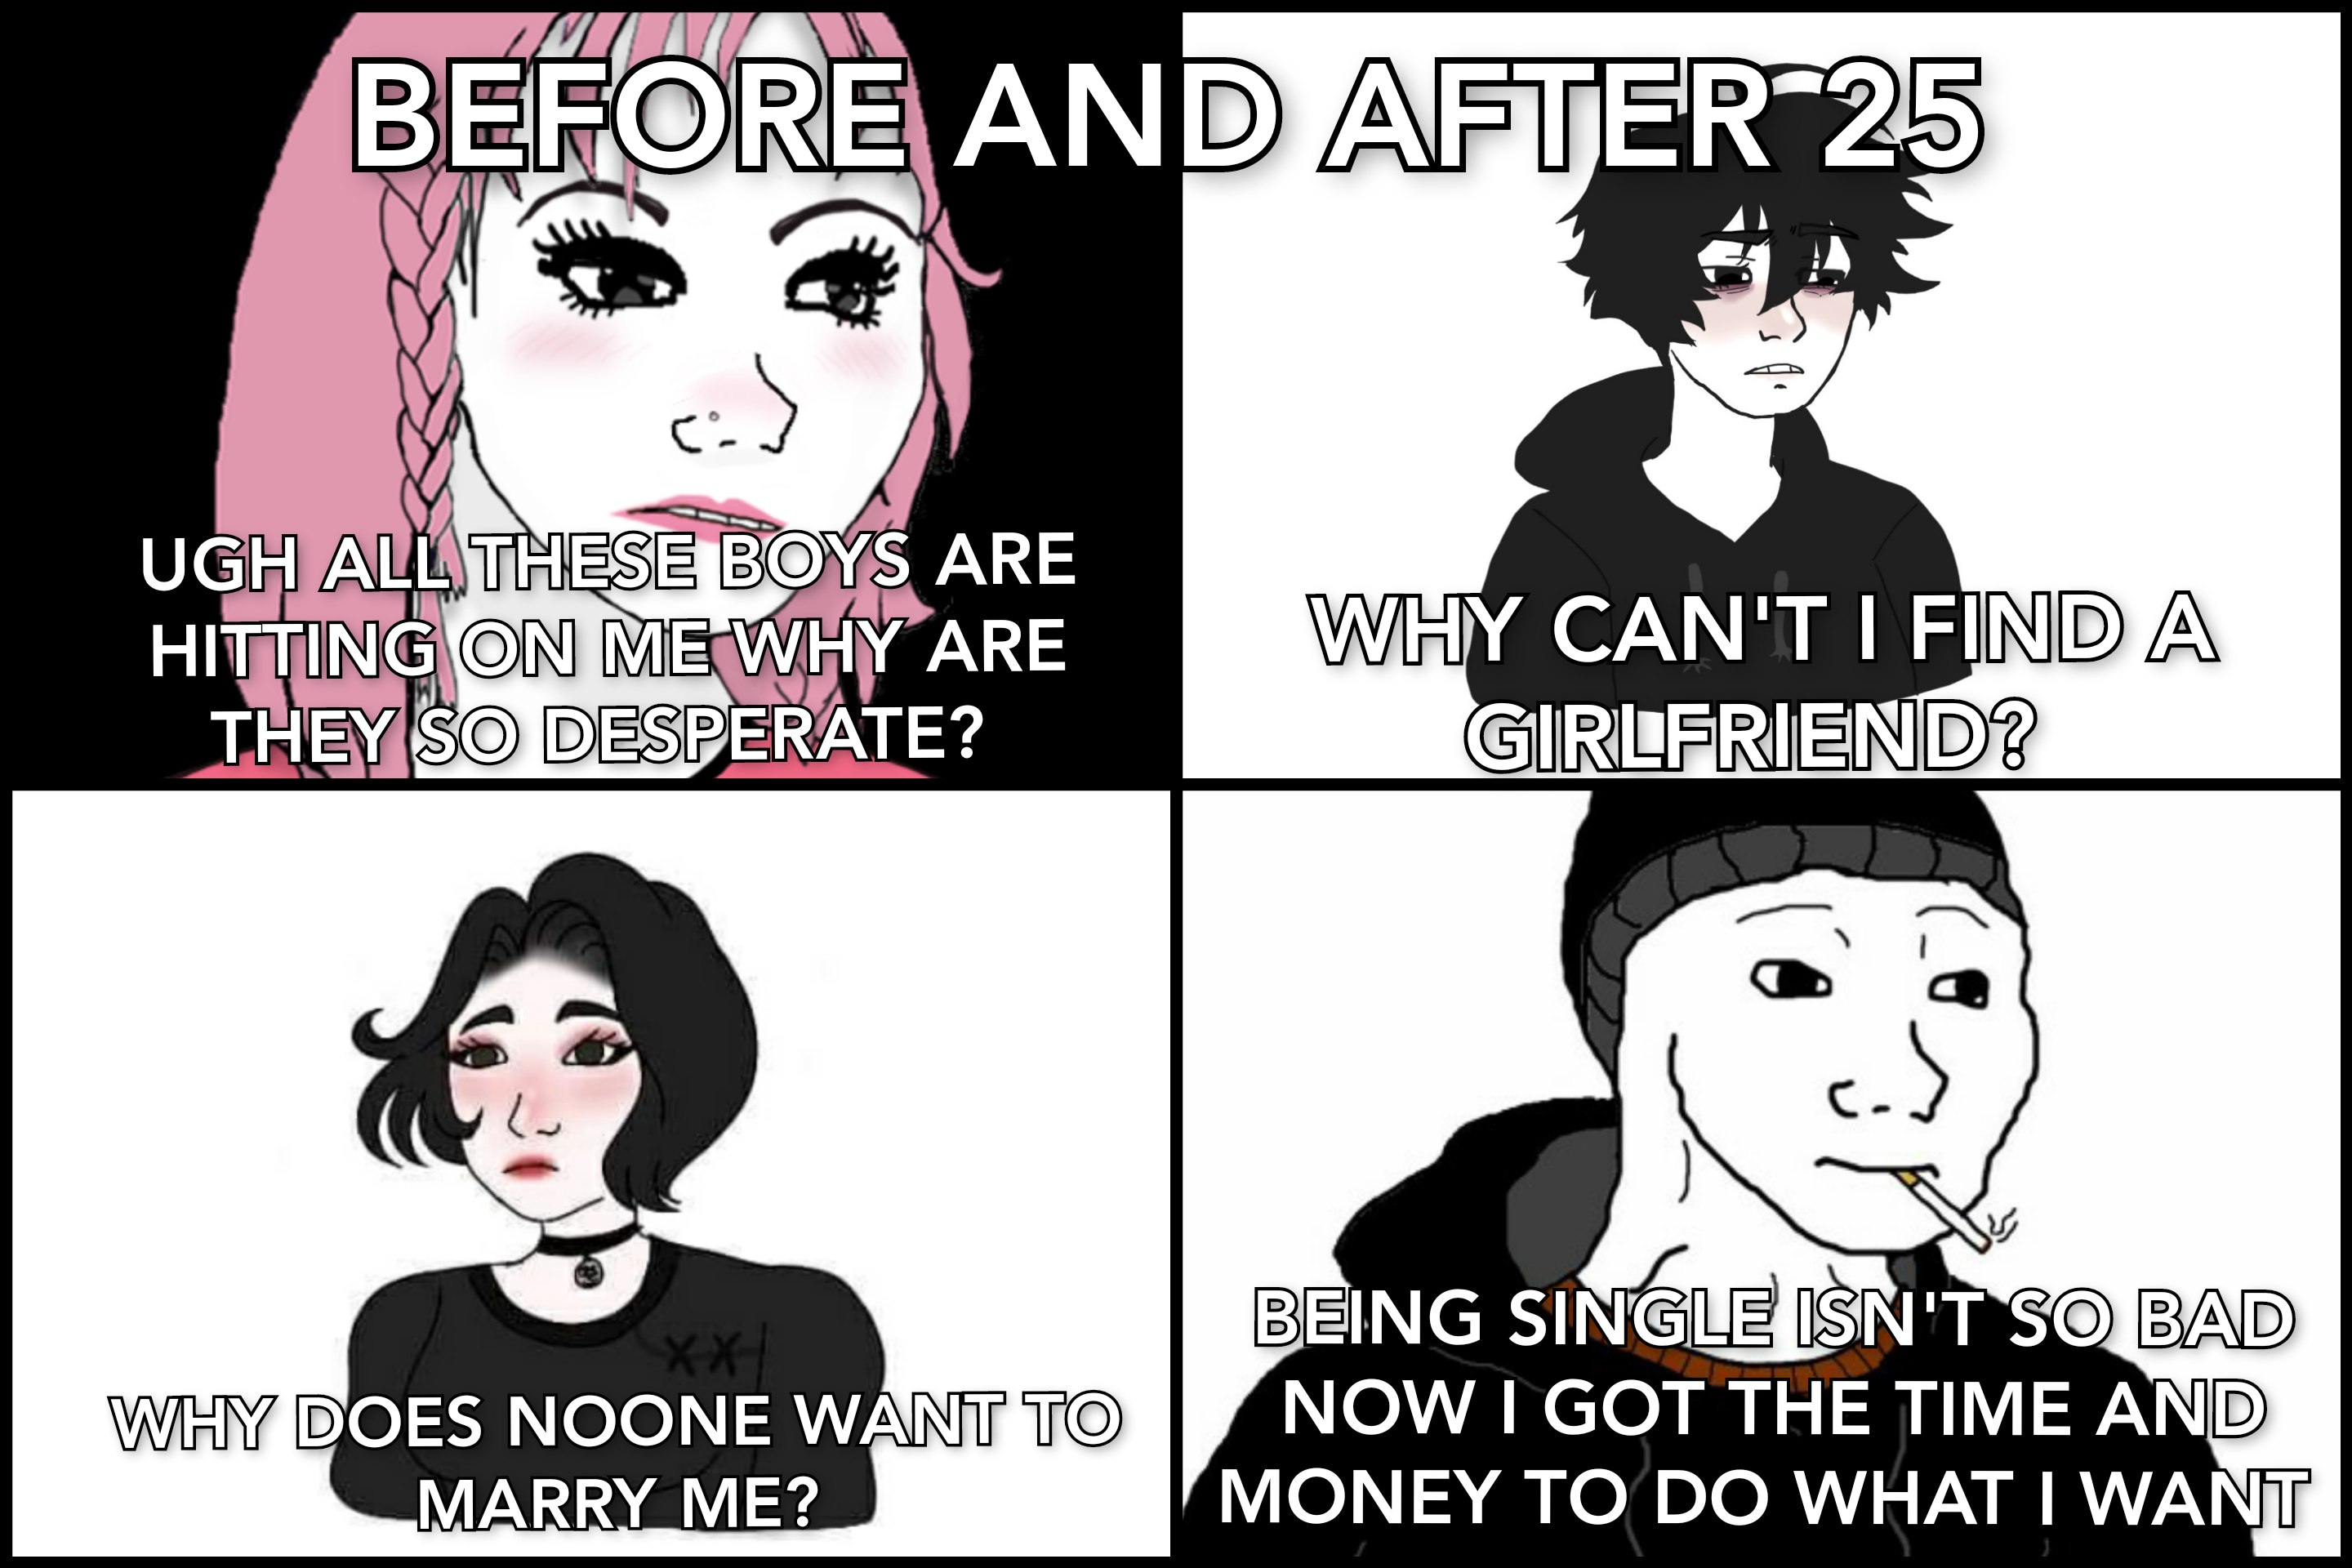 cartoon - Before And After 25 Ugh All These Boys Are Hitting On Me Why Are They So Desperate? Why Can'T I Find A Girlfriend? Why Does Noone Want To Marry Me? Being Single Isn'T So Bad Now I Got The Time And Money To Do What I Want